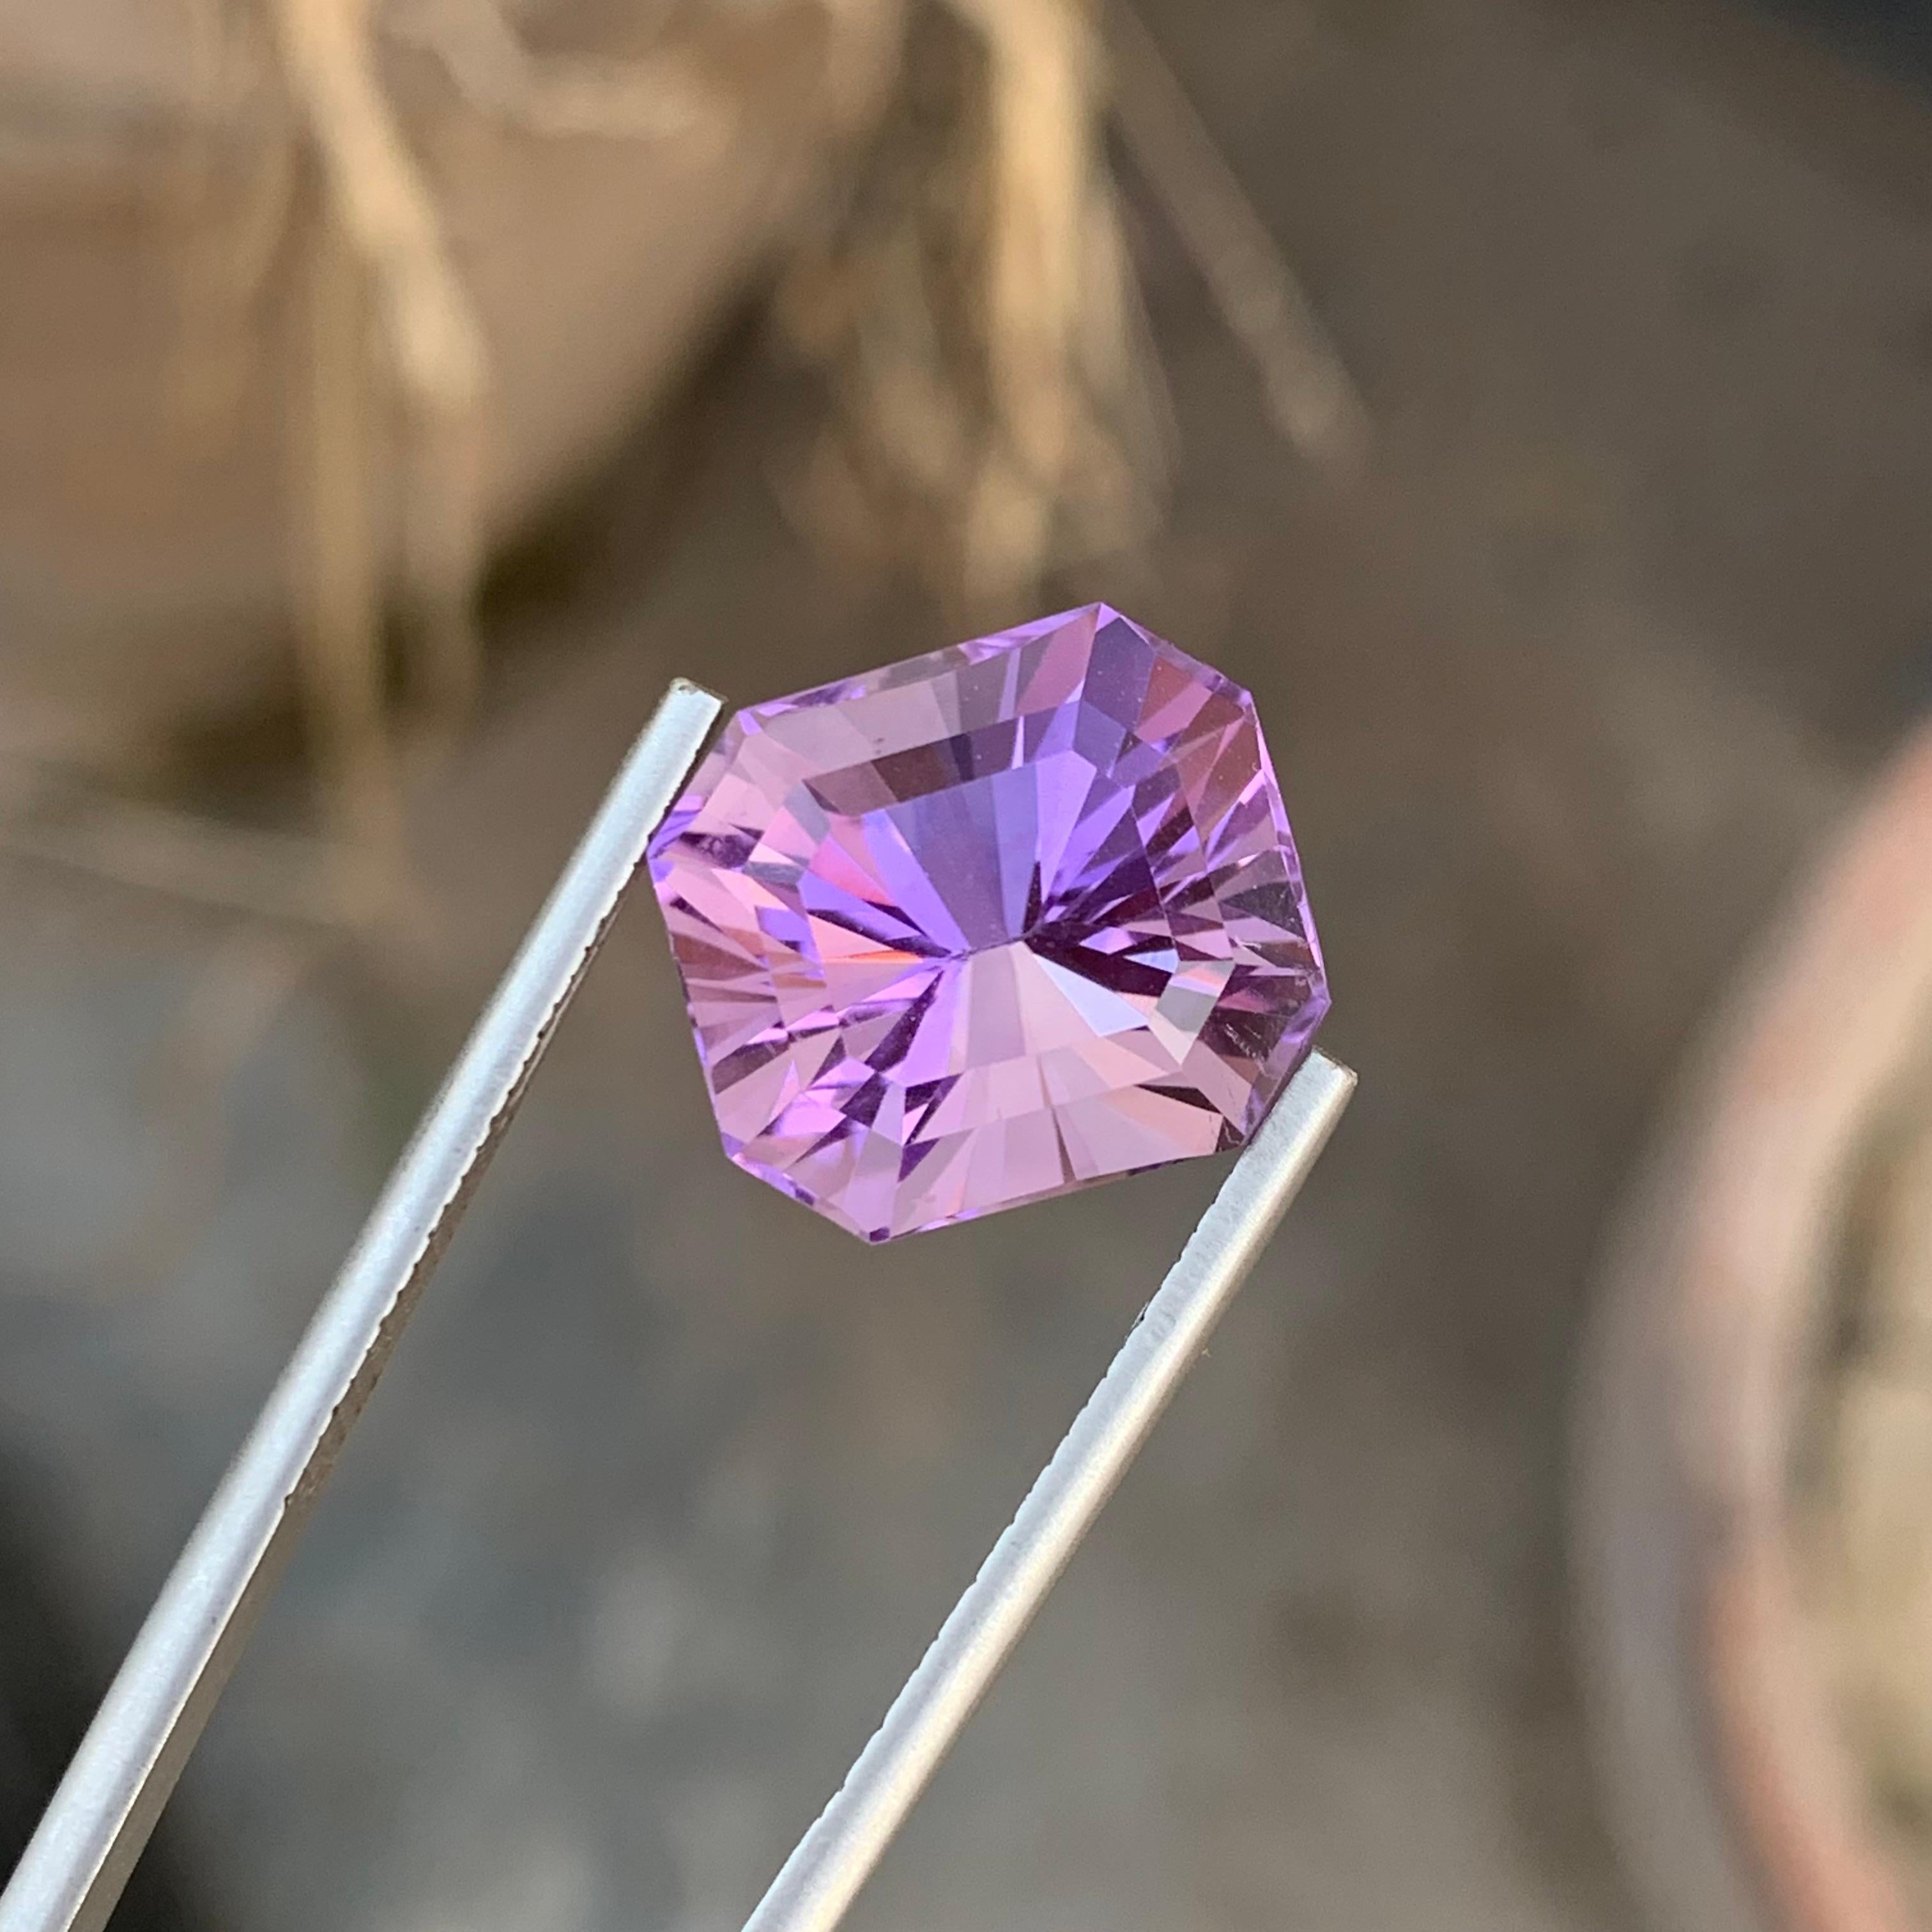 Loose Amethyst
Weight: 13 Carats
Dimension: 12.6 x 14.1 x 11.9 Mm
Colour: Purple
Origin: Brazil
Treatment: Non
Certificate: On Demand
Shape: Emerald 

Amethyst, a stunning variety of quartz known for its mesmerizing purple hue, has captivated humans